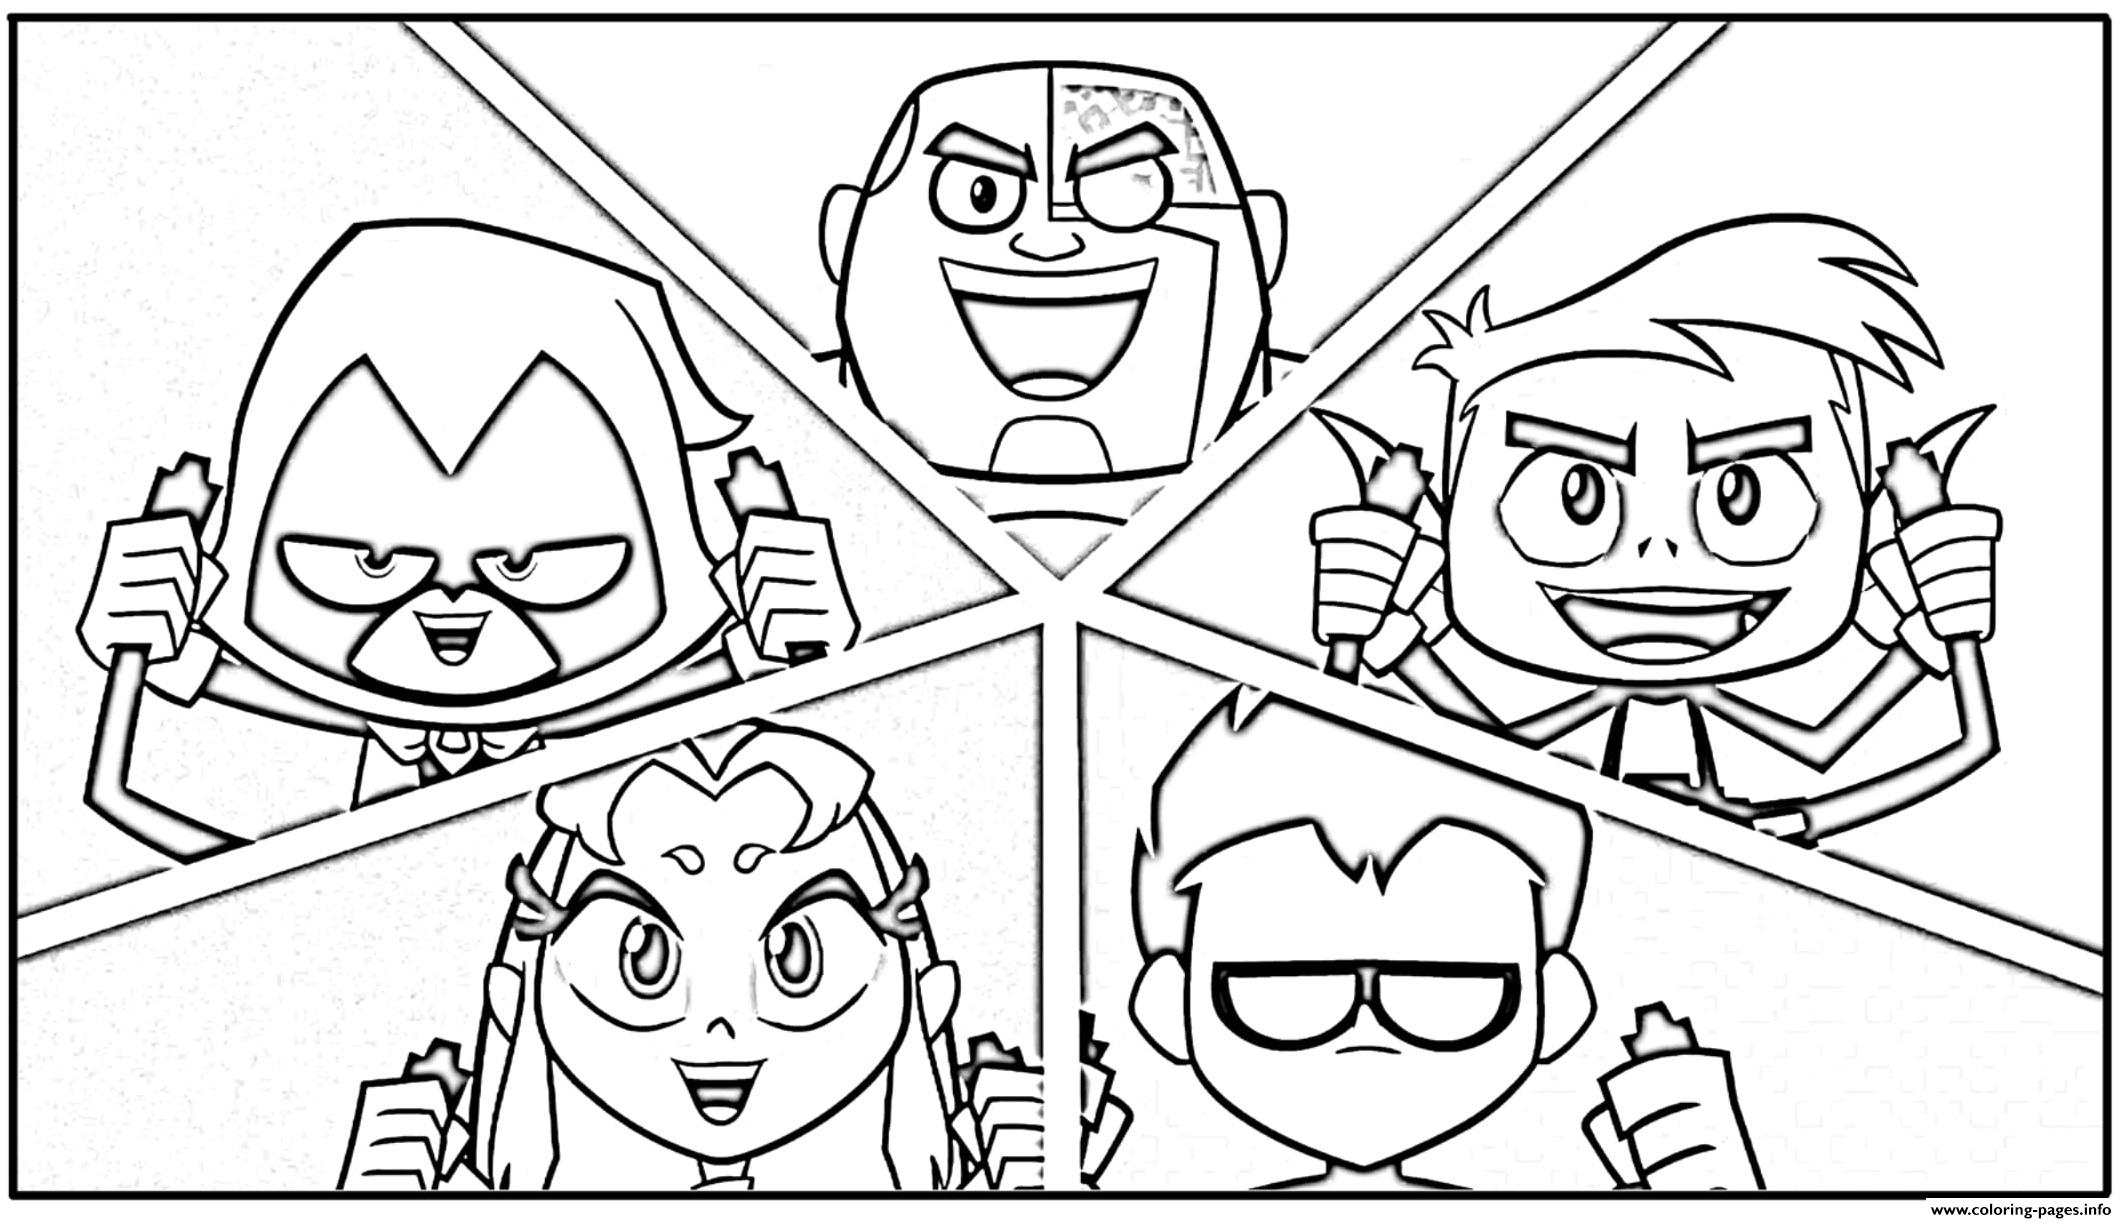 16-teen-titans-coloring-pages-all-characters-printable-sheets-print